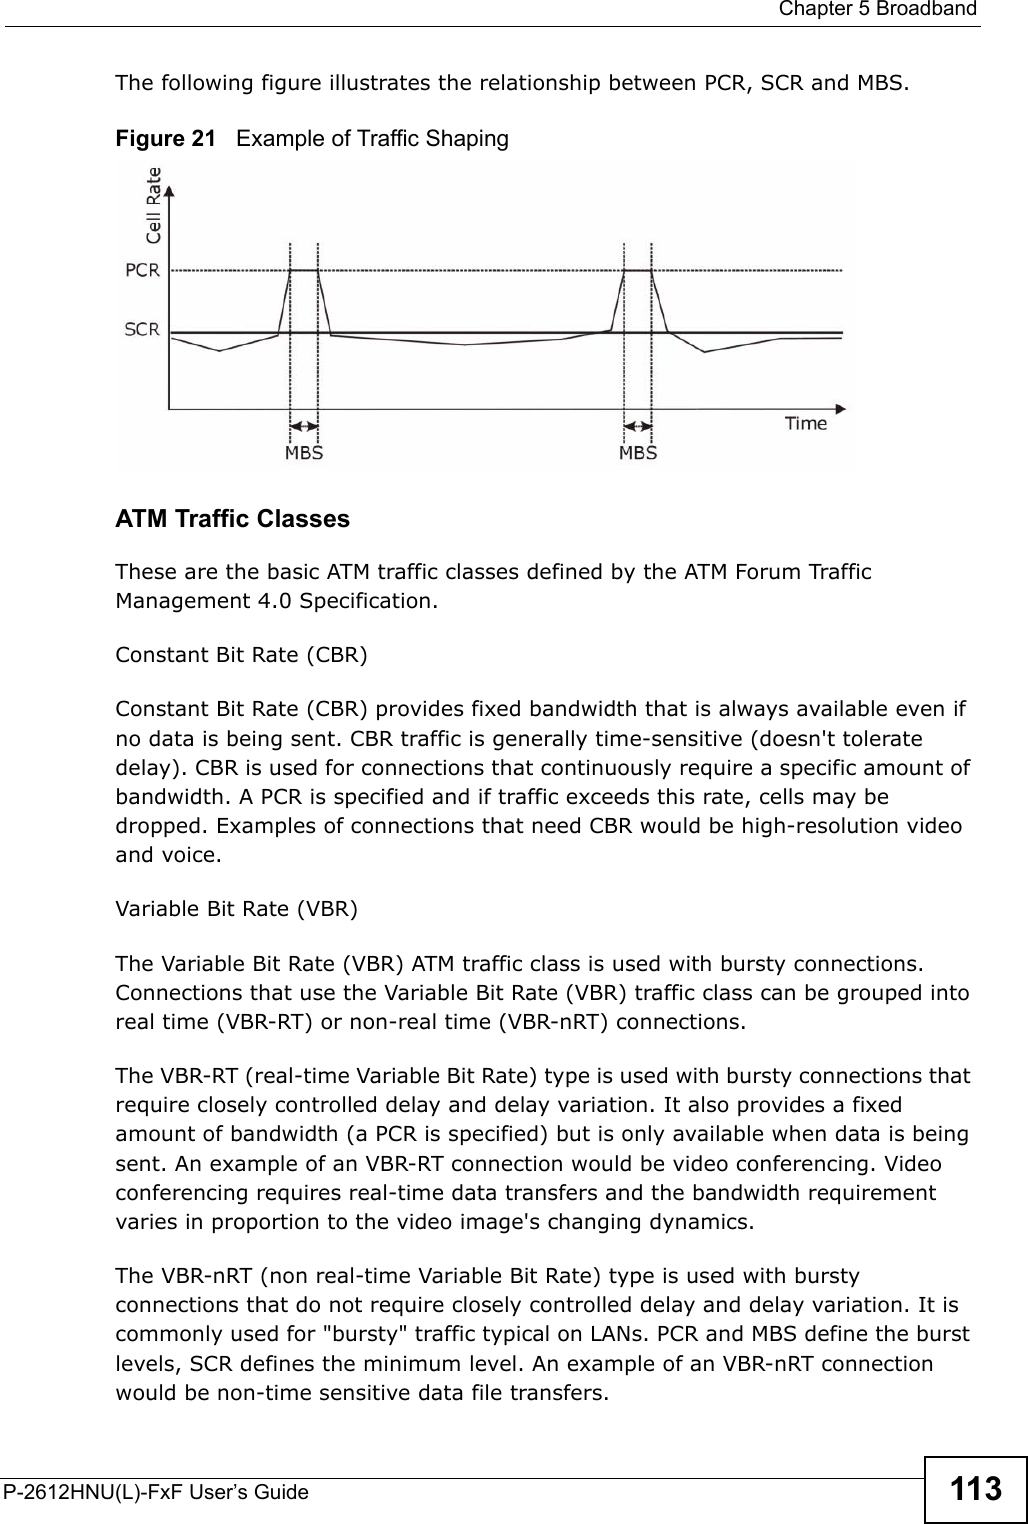  Chapter 5 BroadbandP-2612HNU(L)-FxF User’s Guide 113The following figure illustrates the relationship between PCR, SCR and MBS.Figure 21   Example of Traffic ShapingATM Traffic ClassesThese are the basic ATM traffic classes defined by the ATM Forum Traffic Management 4.0 Specification.Constant Bit Rate (CBR)Constant Bit Rate (CBR) provides fixed bandwidth that is always available even ifno data is being sent. CBR traffic is generally time-sensitive (doesn&apos;t toleratedelay). CBR is used for connections that continuously require a specific amount of bandwidth. A PCR is specified and if traffic exceeds this rate, cells may be dropped. Examples of connections that need CBR would be high-resolution video and voice.Variable Bit Rate (VBR) The Variable Bit Rate (VBR) ATM traffic class is used with bursty connections. Connections that use the Variable Bit Rate (VBR) traffic class can be grouped into real time (VBR-RT) or non-real time (VBR-nRT) connections.The VBR-RT (real-time Variable Bit Rate) type is used with bursty connections thatrequire closely controlled delay and delay variation. It also provides a fixed amount of bandwidth (a PCR is specified) but is only available when data is being sent. An example of an VBR-RT connection would be video conferencing. Video conferencing requires real-time data transfers and the bandwidth requirement varies in proportion to the video image&apos;s changing dynamics. The VBR-nRT (non real-time Variable Bit Rate) type is used with burstyconnections that do not require closely controlled delay and delay variation. It is commonly used for &quot;bursty&quot; traffic typical on LANs. PCR and MBS define the burst levels, SCR defines the minimum level. An example of an VBR-nRT connection would be non-time sensitive data file transfers.